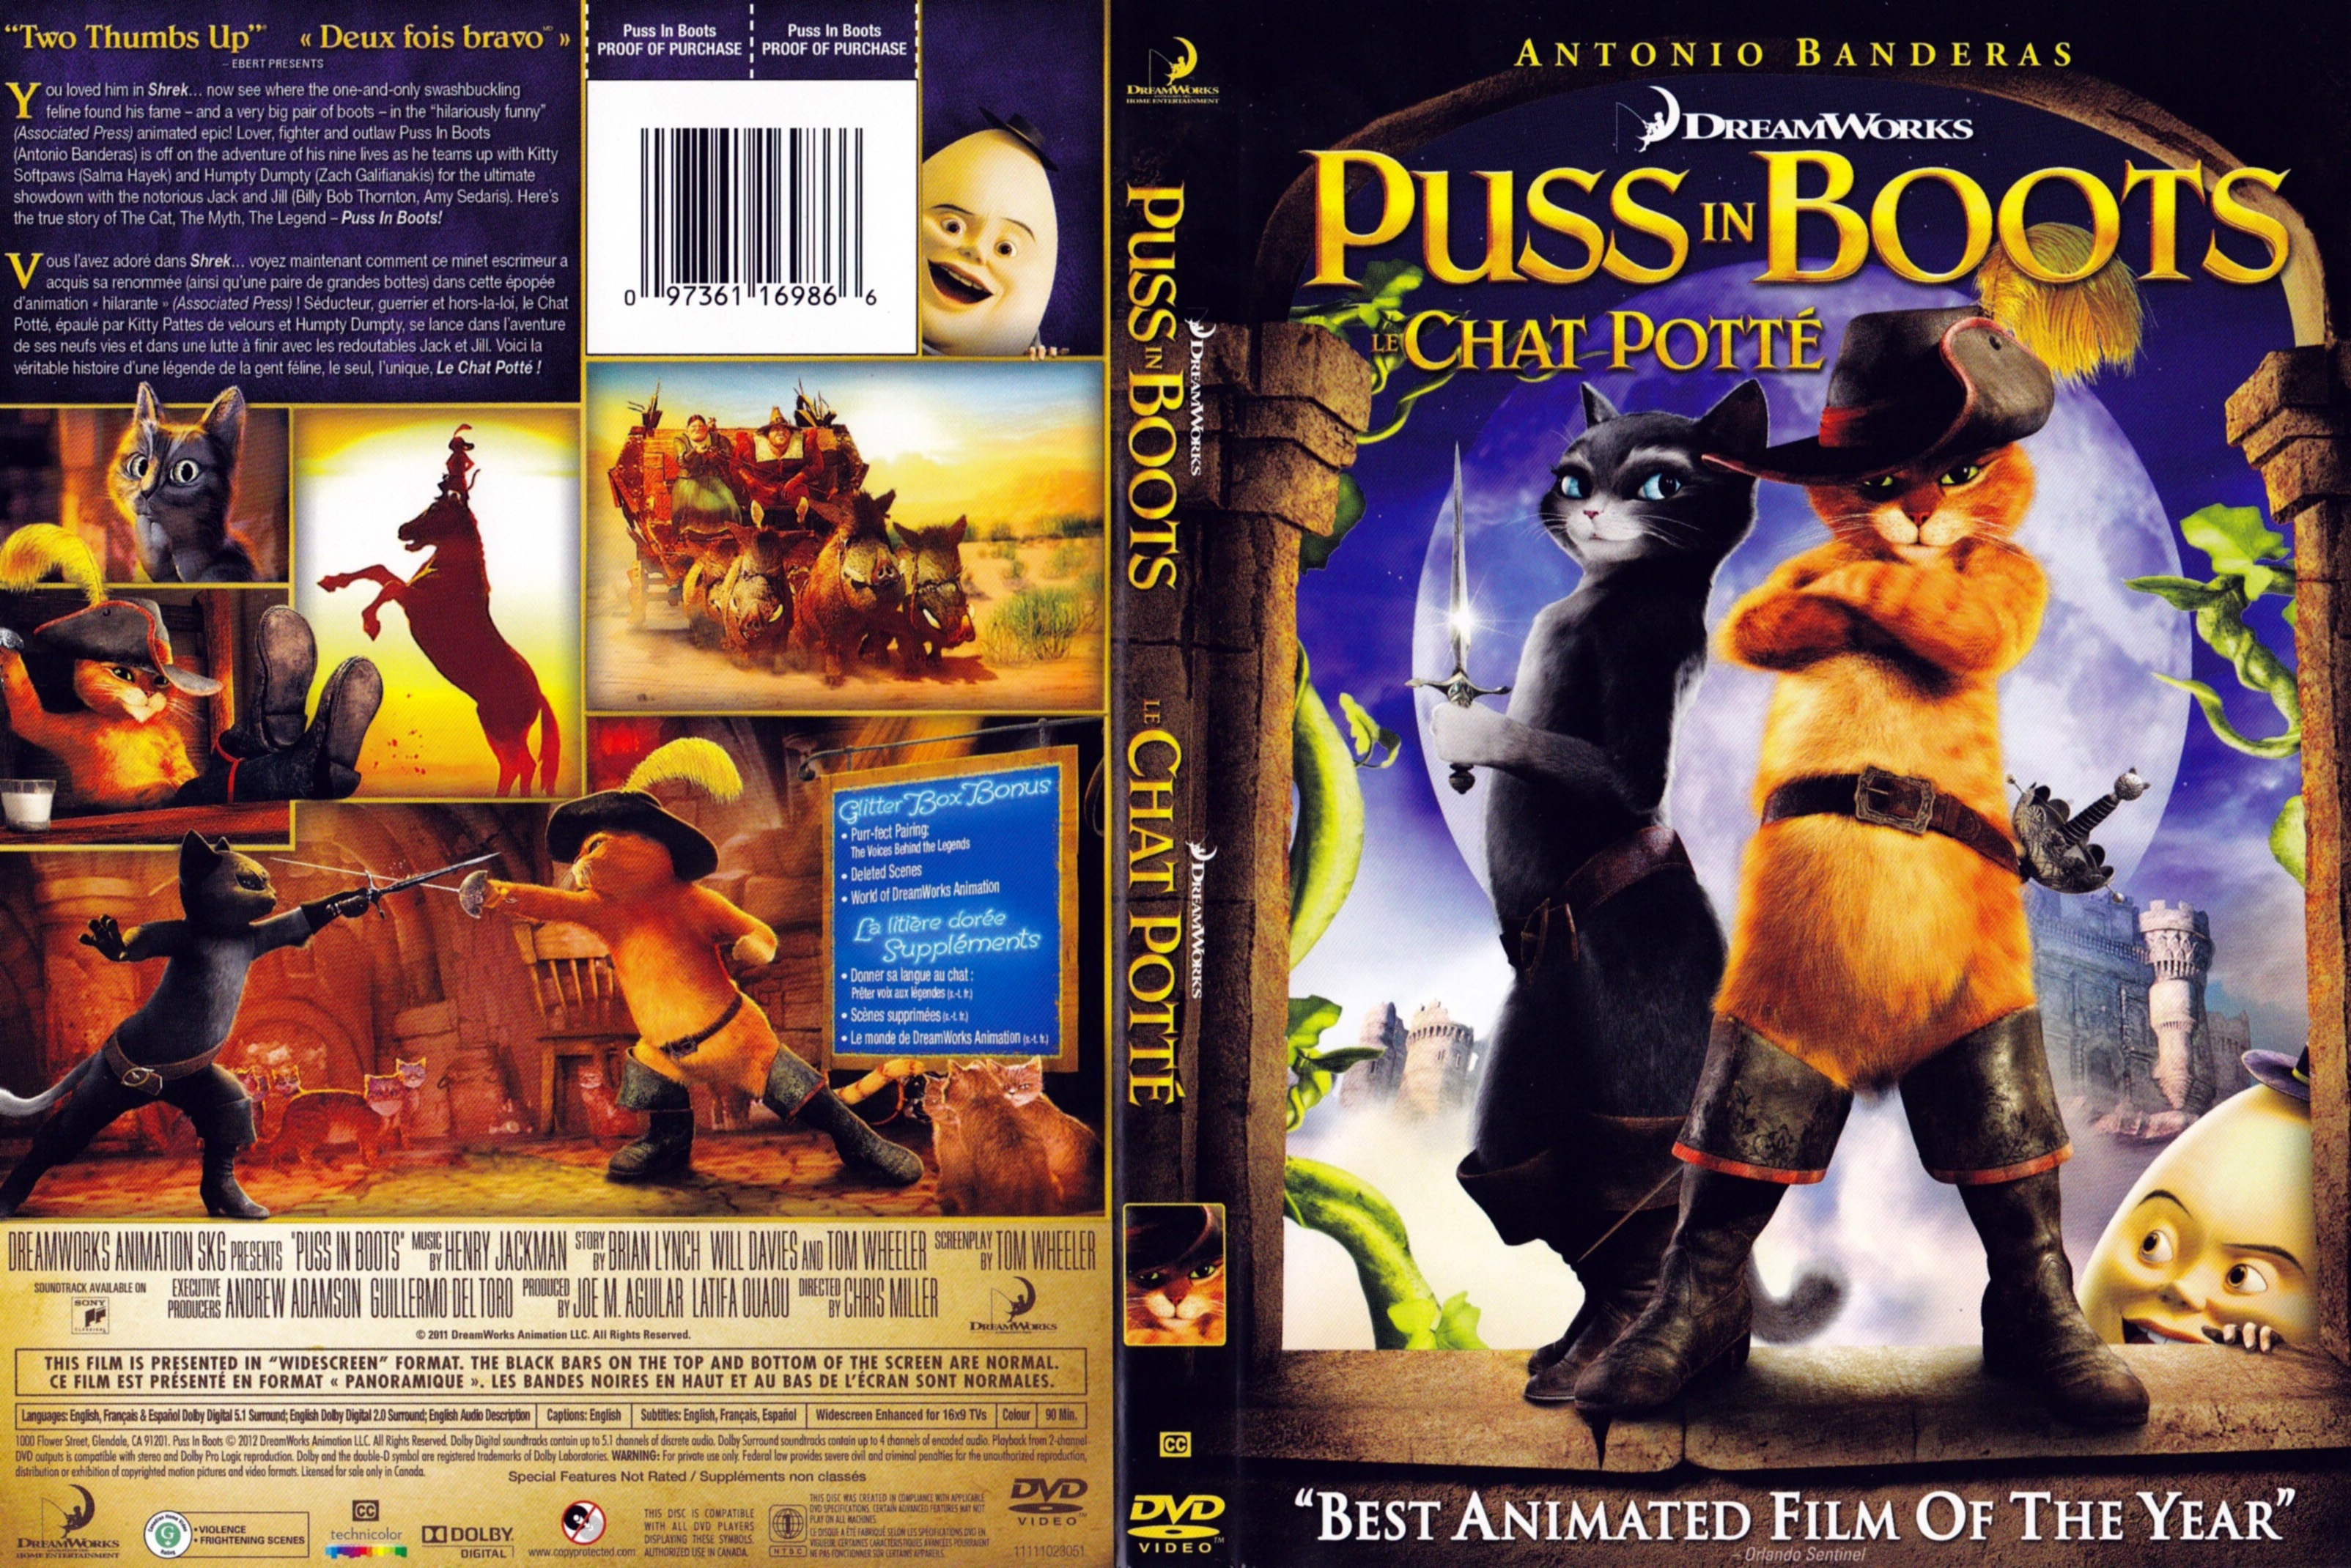 Jaquette DVD Chat Pott - Puss in boots (Canadienne)